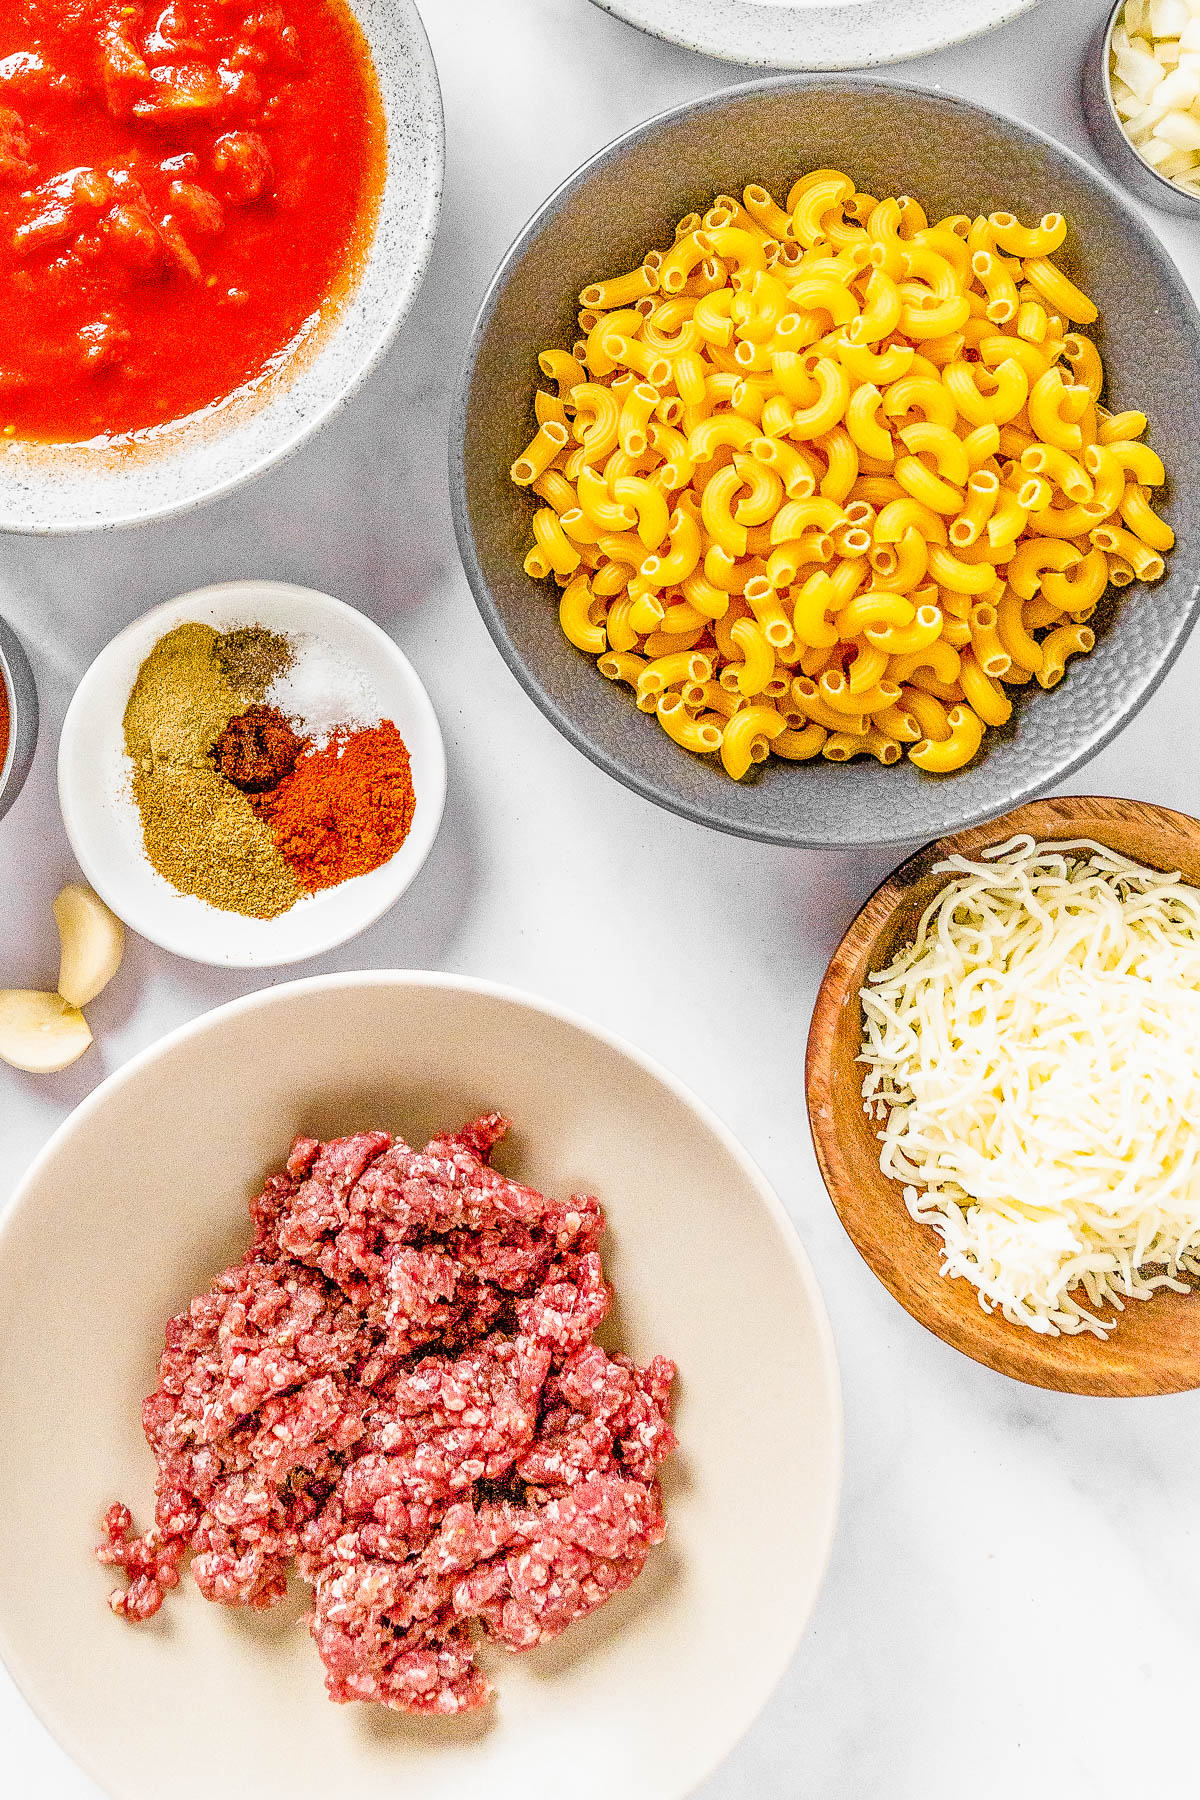 Various ingredients for cooking arranged on a table, including bowls of raw ground beef, shredded cheese, macaroni, spices, and a sauce.